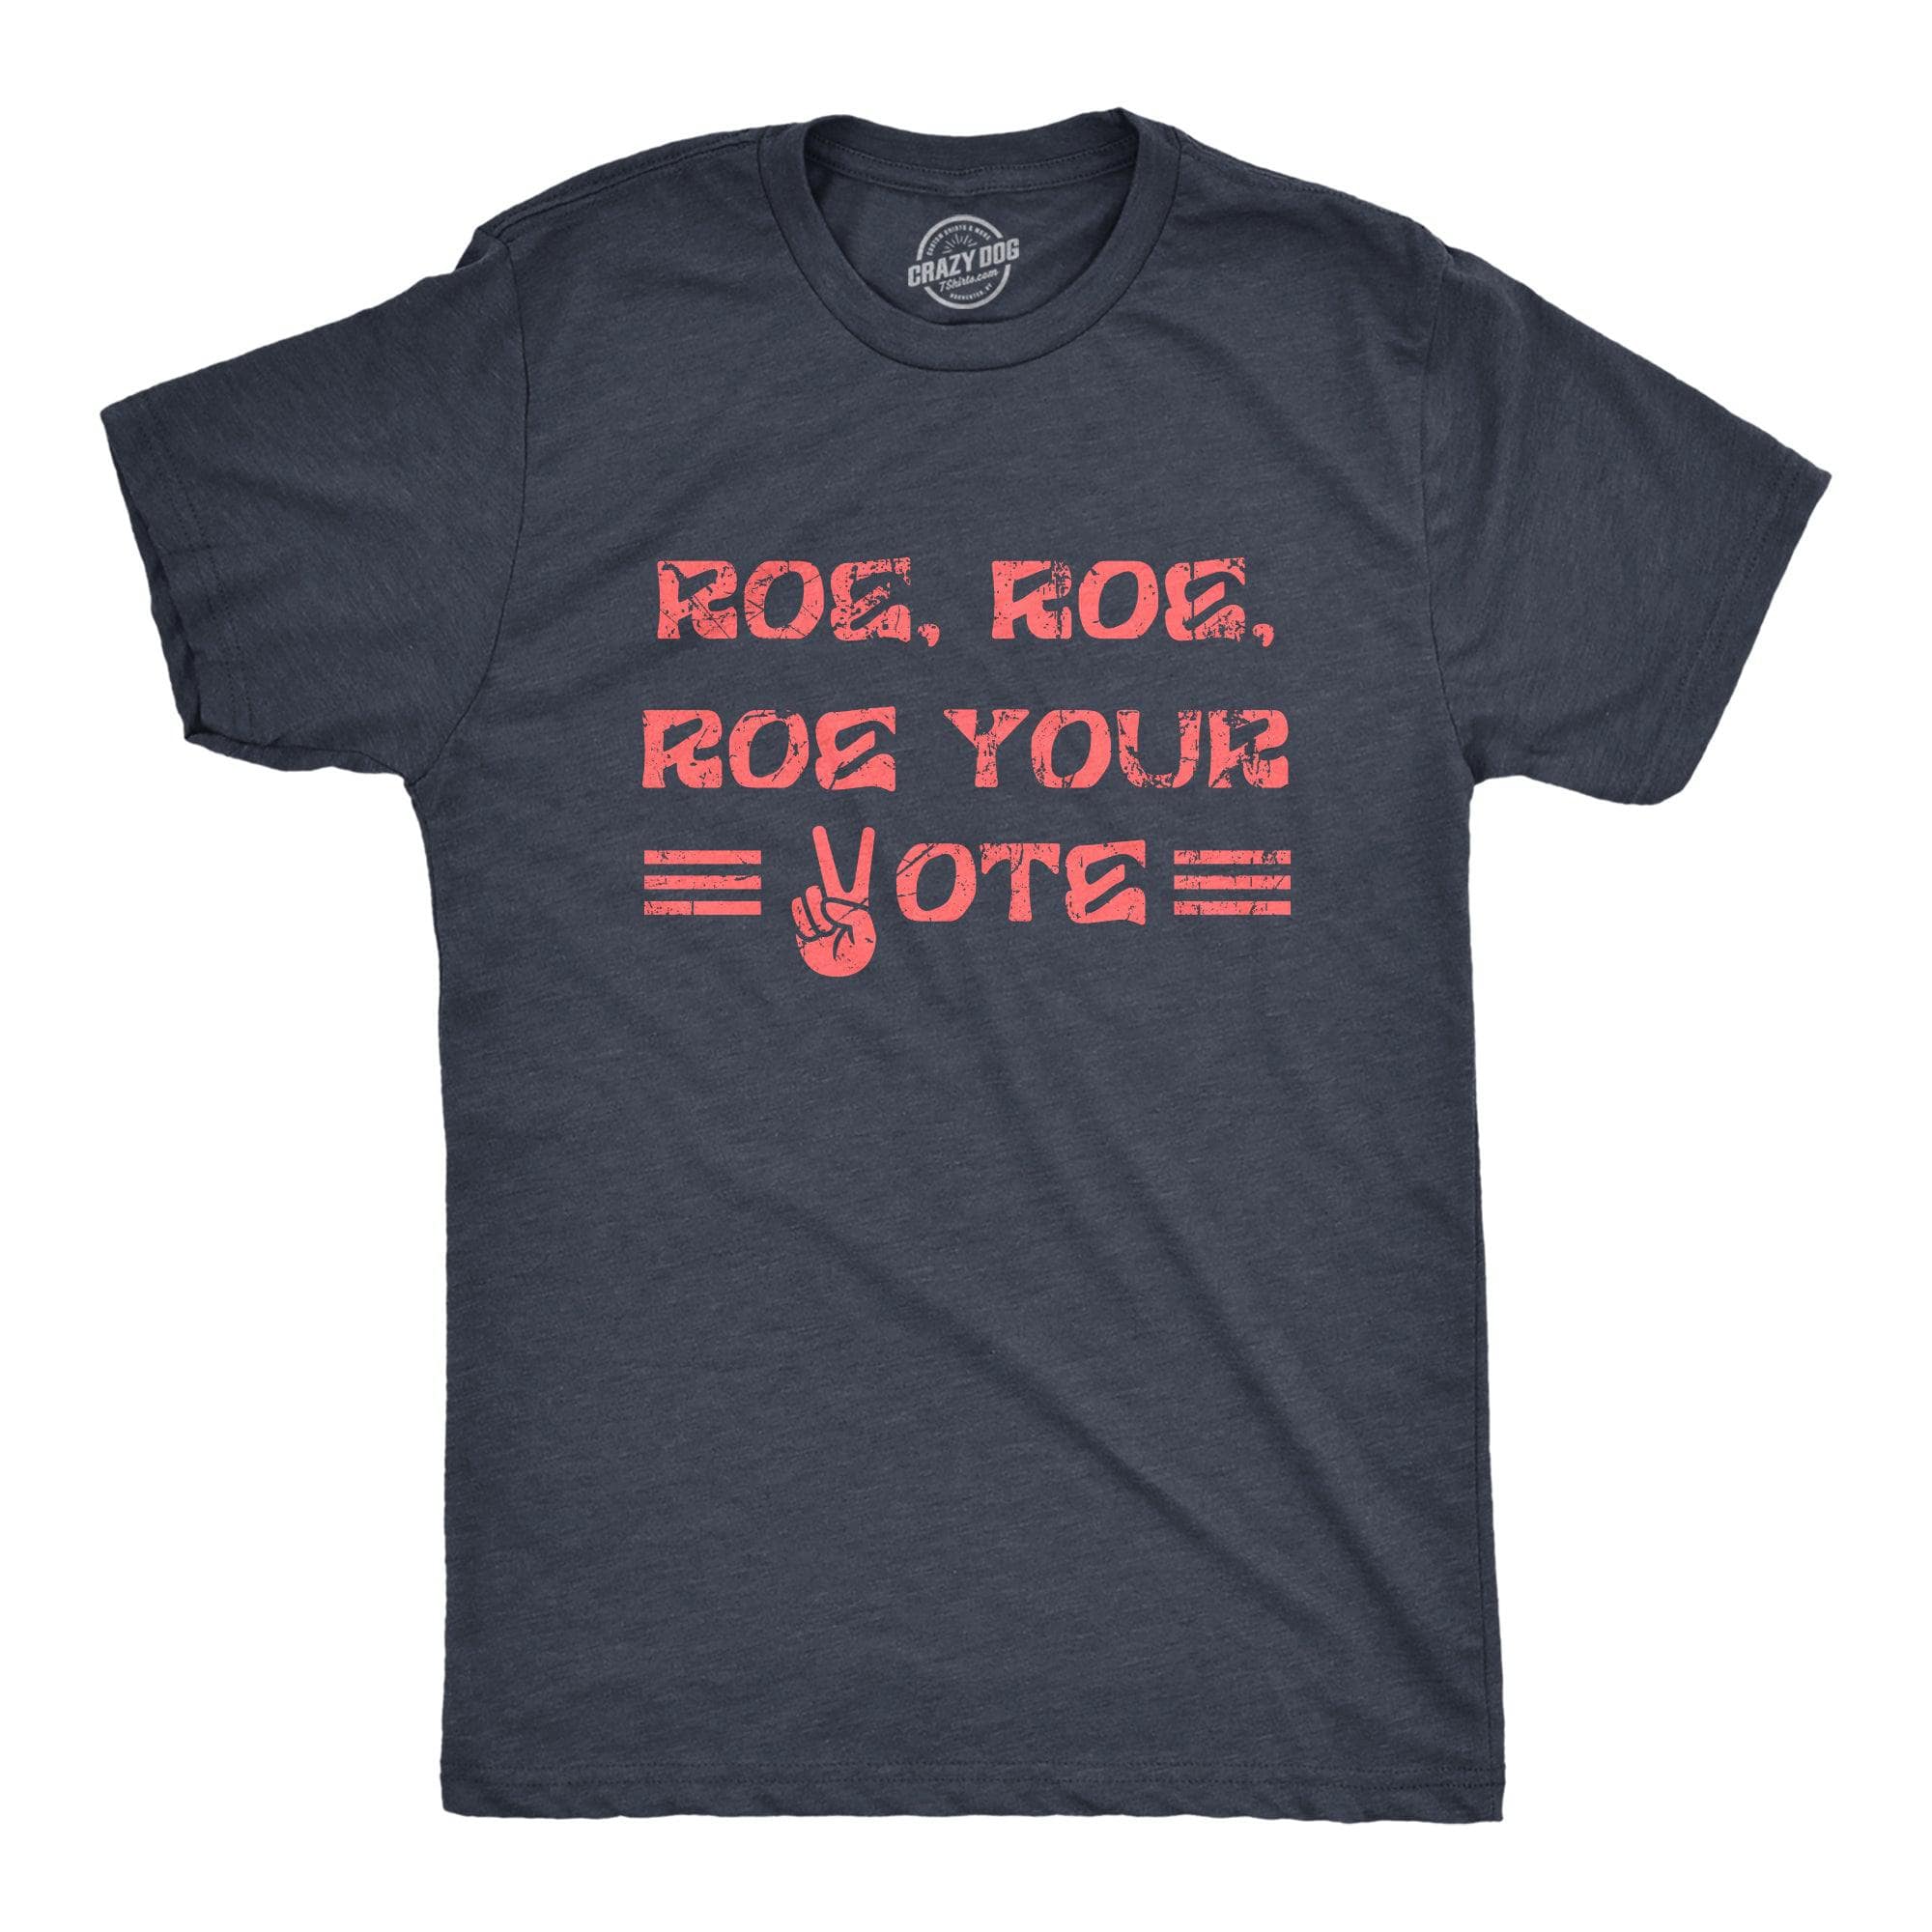 Roe Roe Roe Your Vote Men's Tshirt  -  Crazy Dog T-Shirts